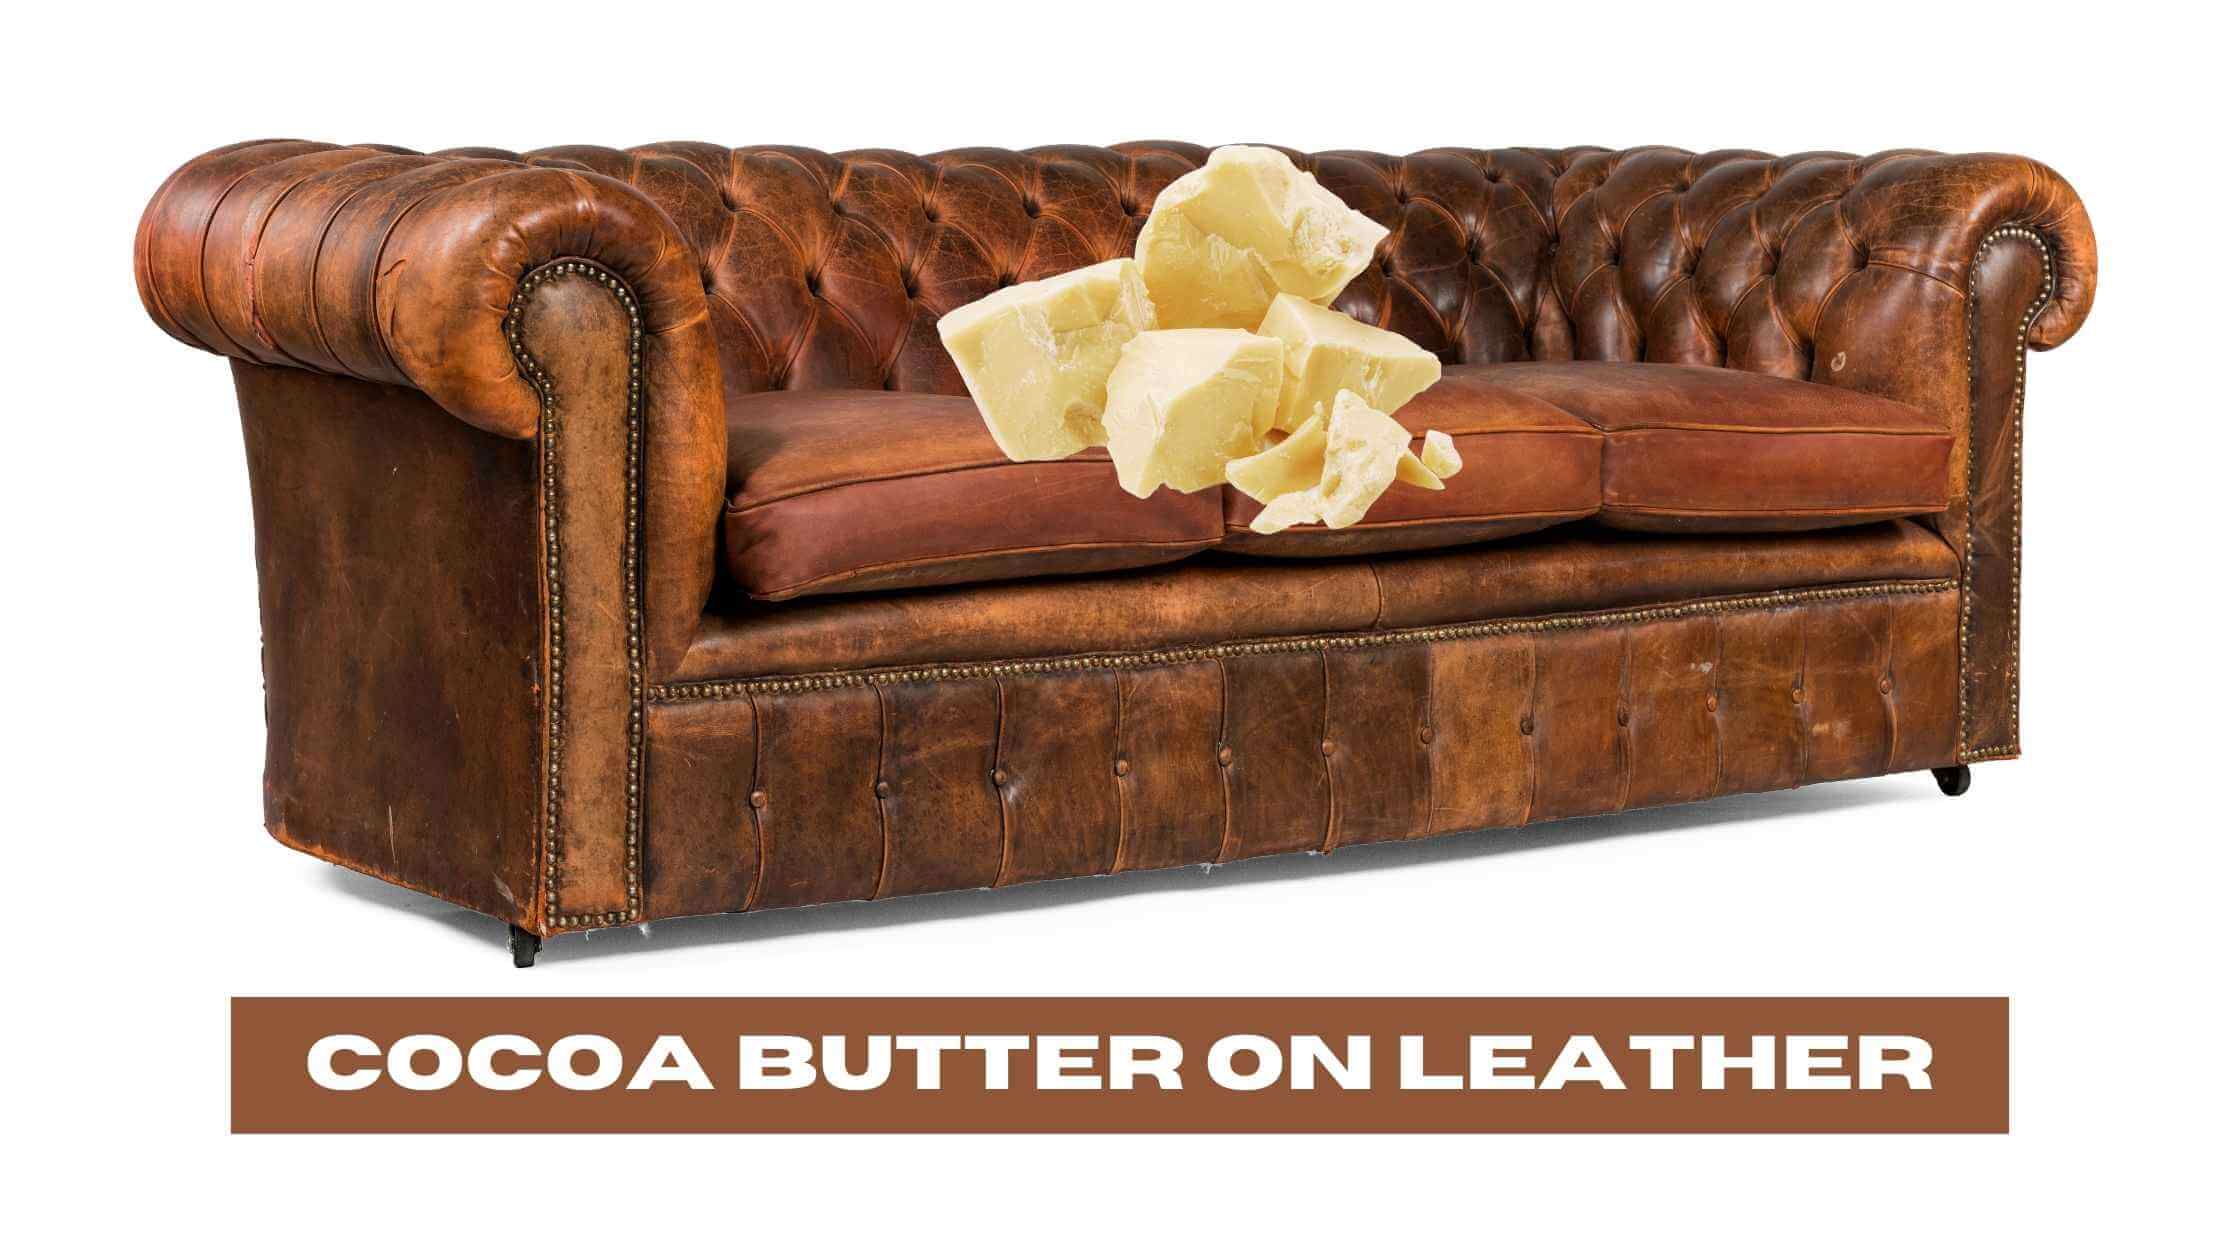 Cocoa Butter on Leather